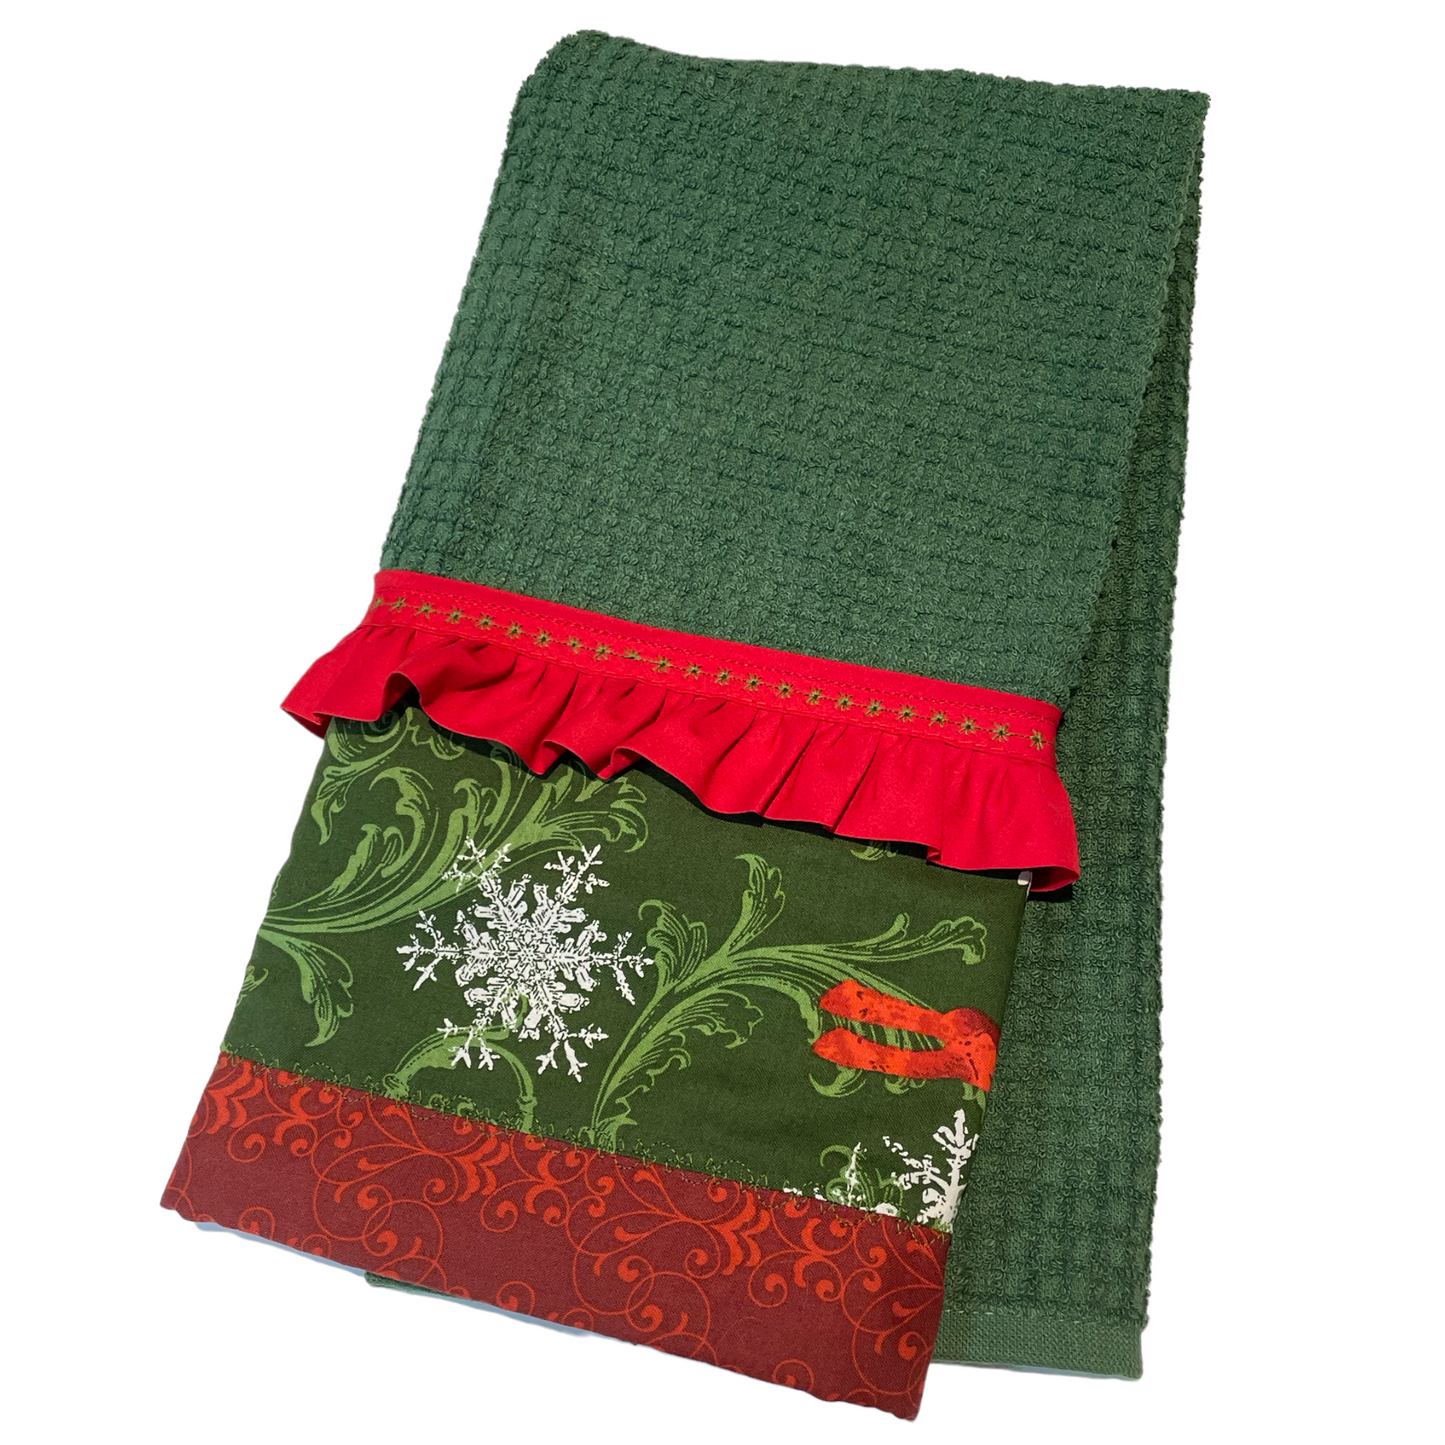 Christmas Kitchen Dish Towel, Cute Green and Red Christmas Tea Towel - Home Stitchery Decor